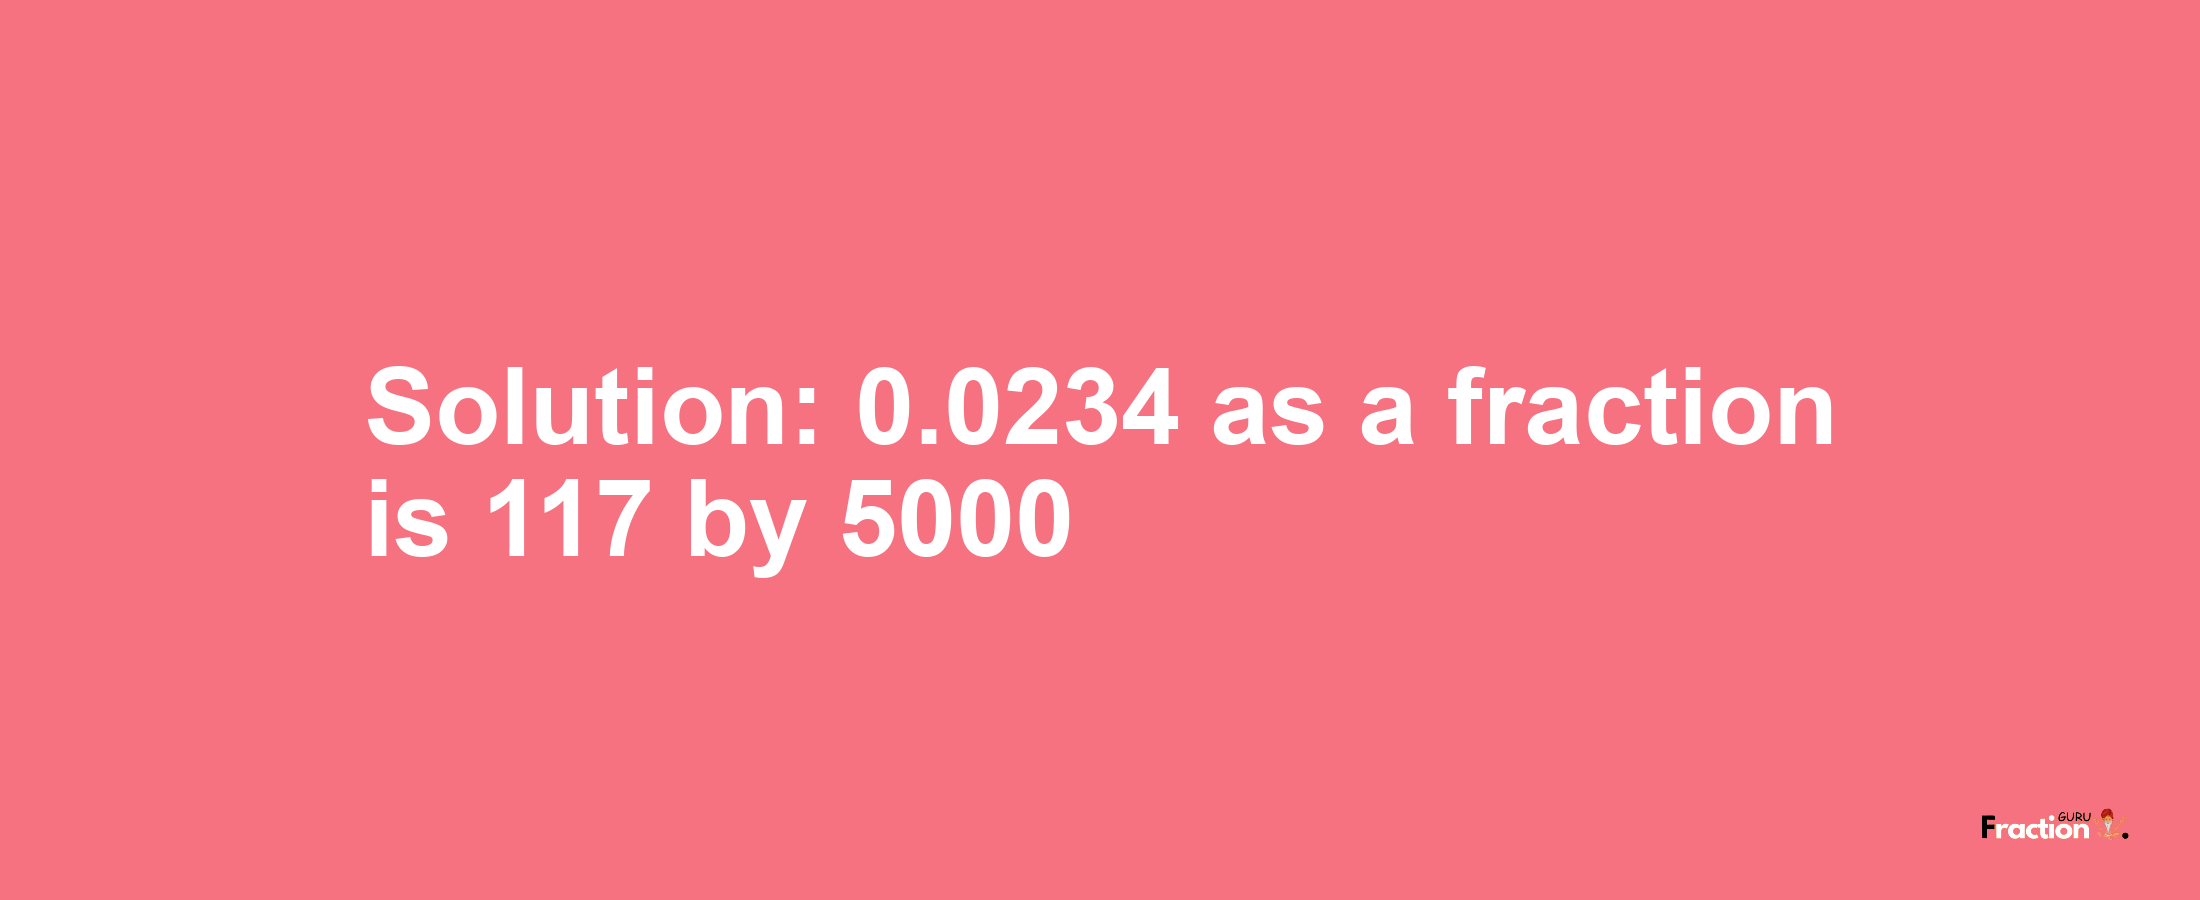 Solution:0.0234 as a fraction is 117/5000